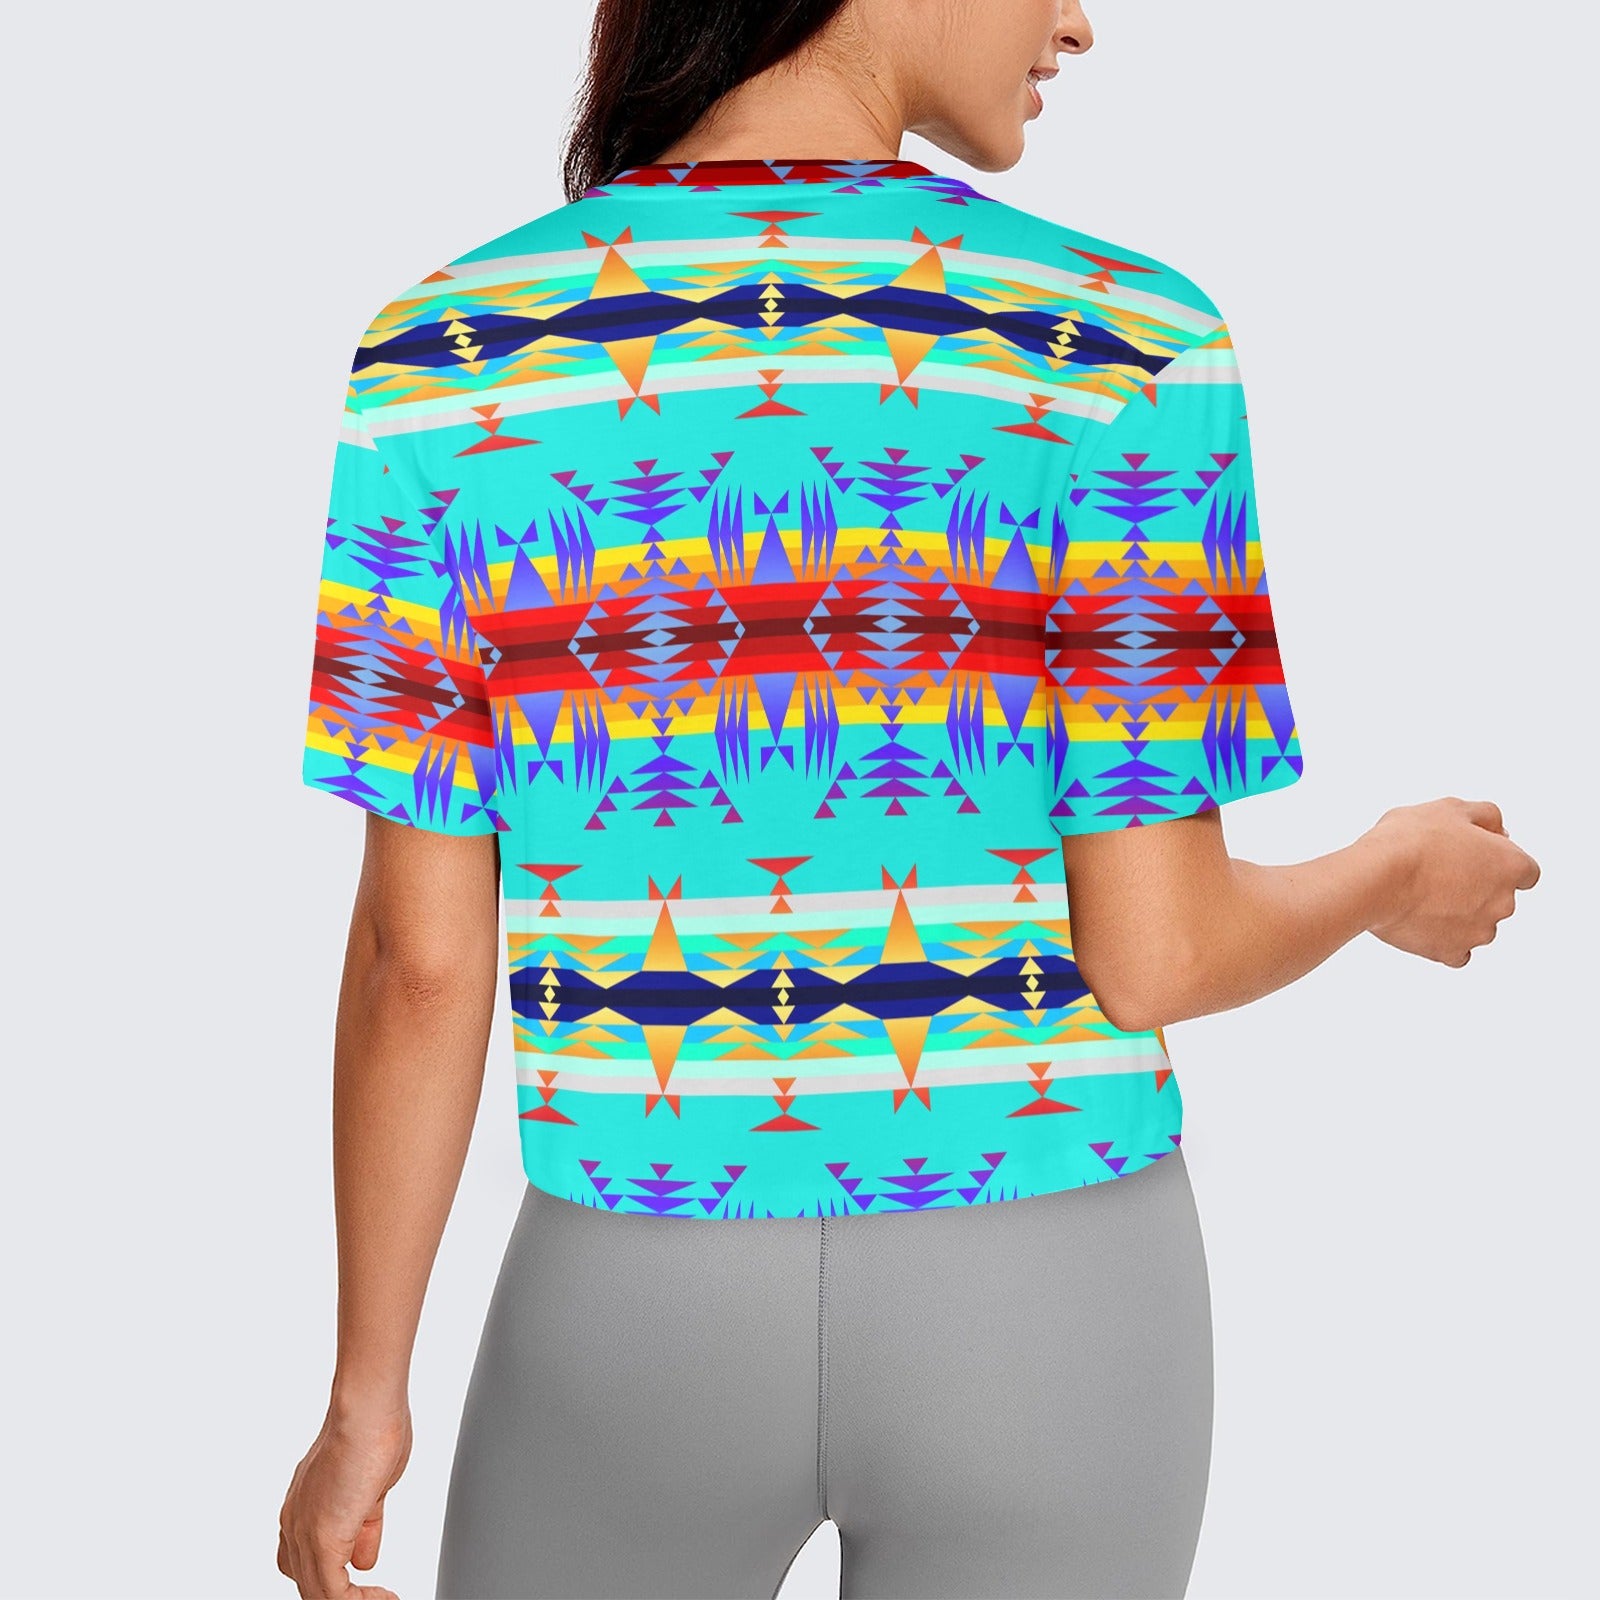 Between the Mountains Fire Women's Cropped T-shirt